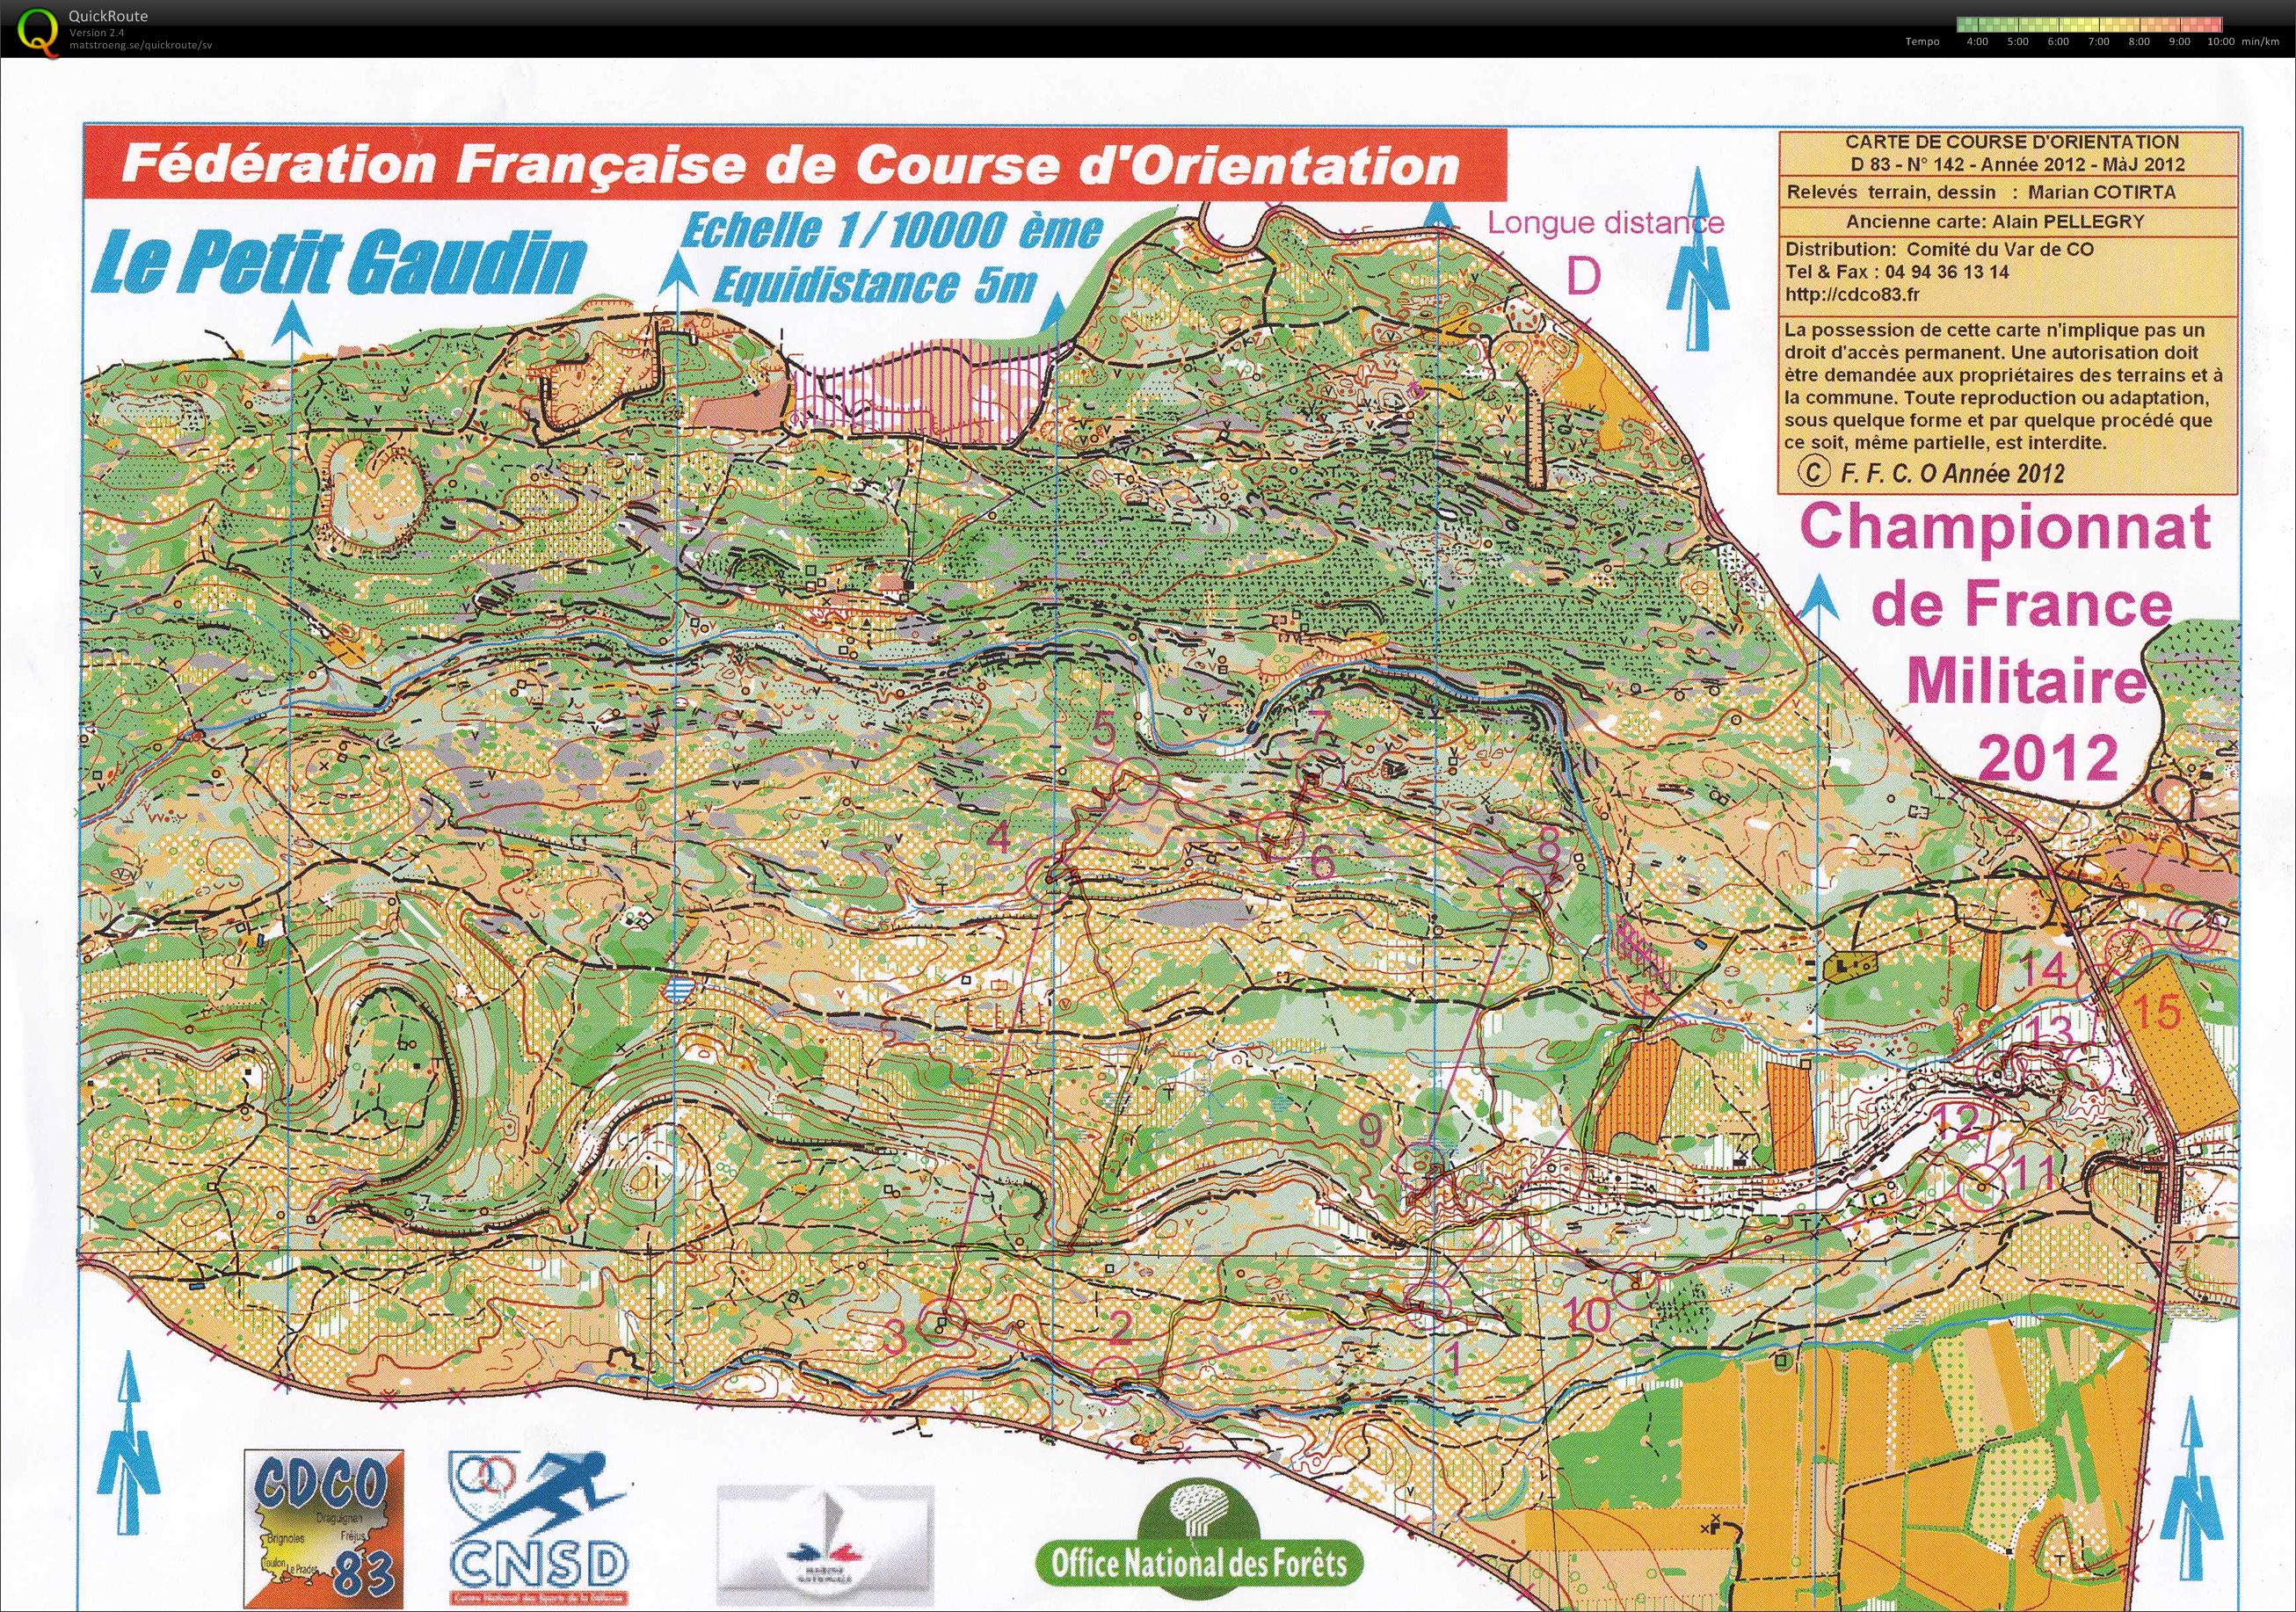 Open race after French Military long dist champ H60 (11-05-2012)